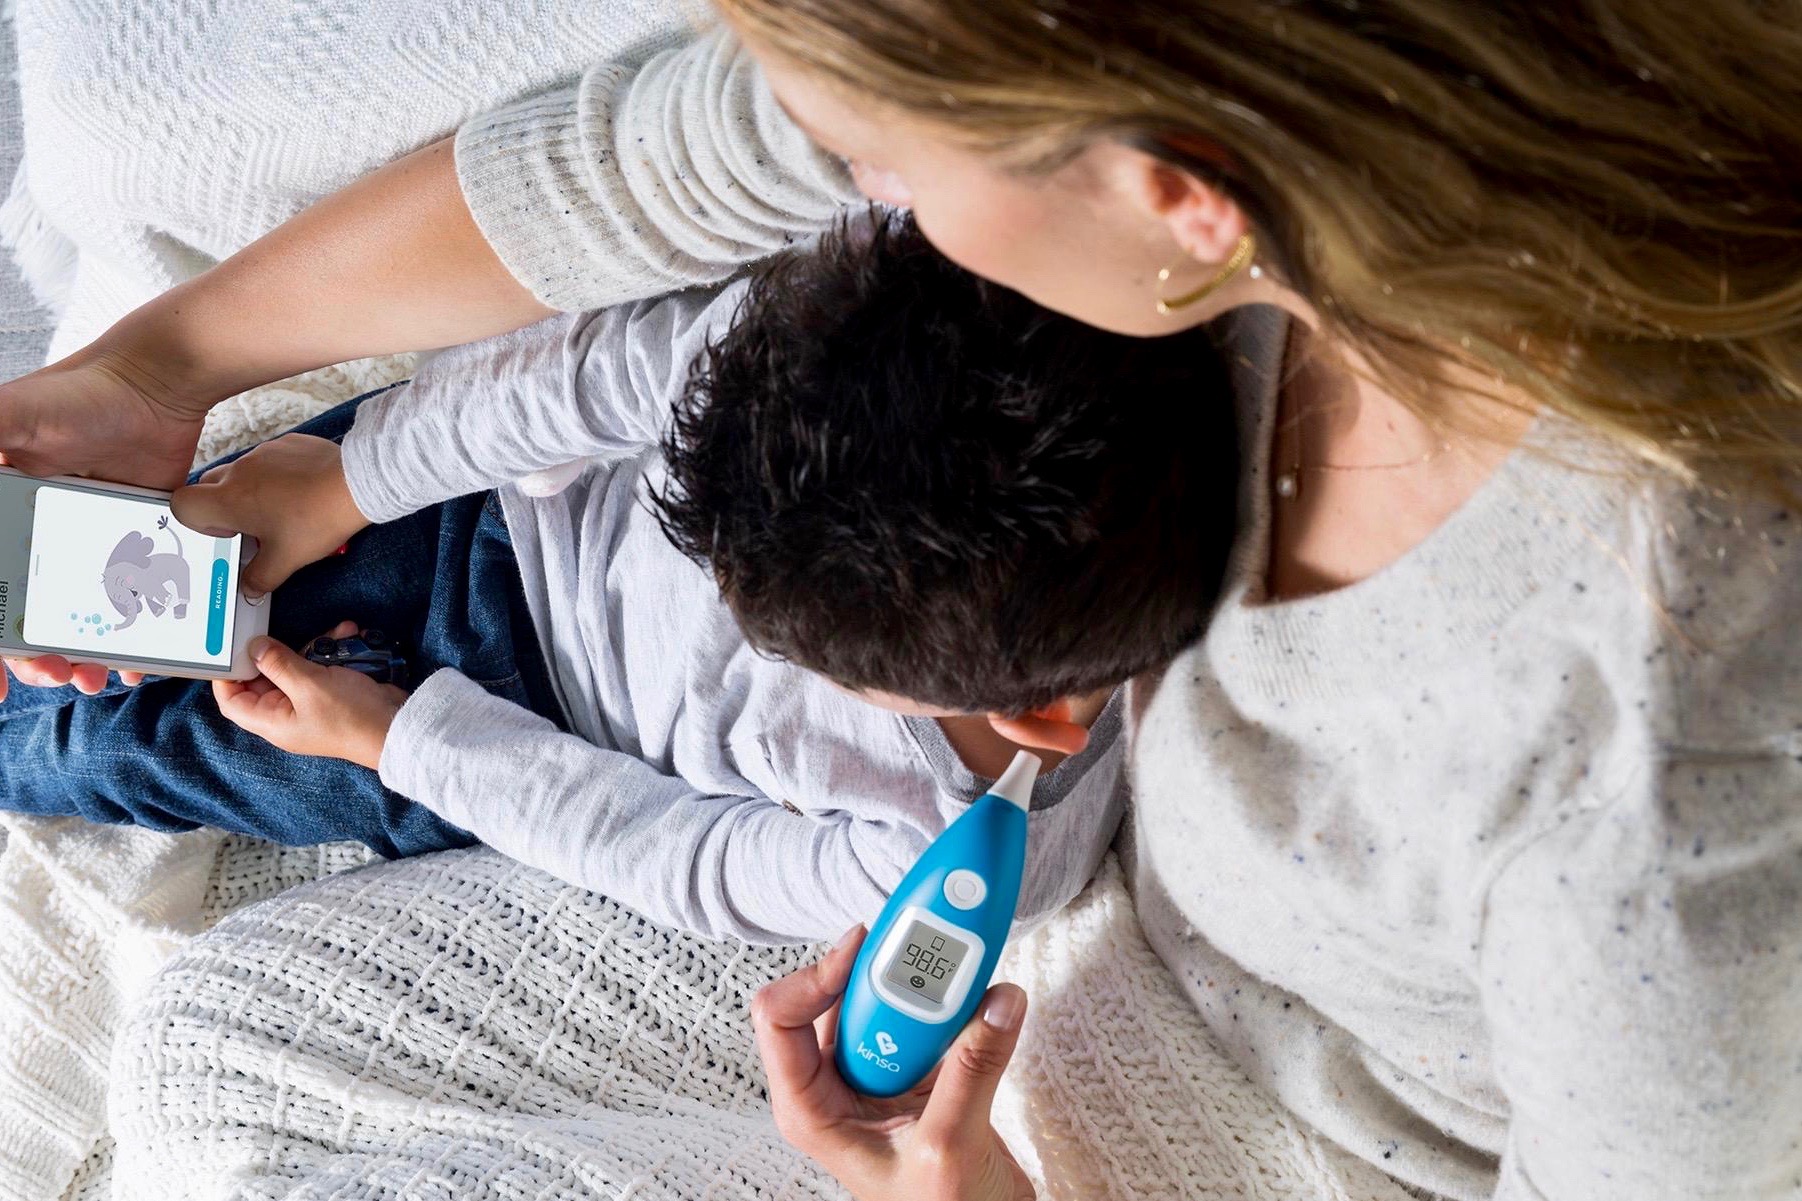 The Best Digital and Smart Thermometers for 2021